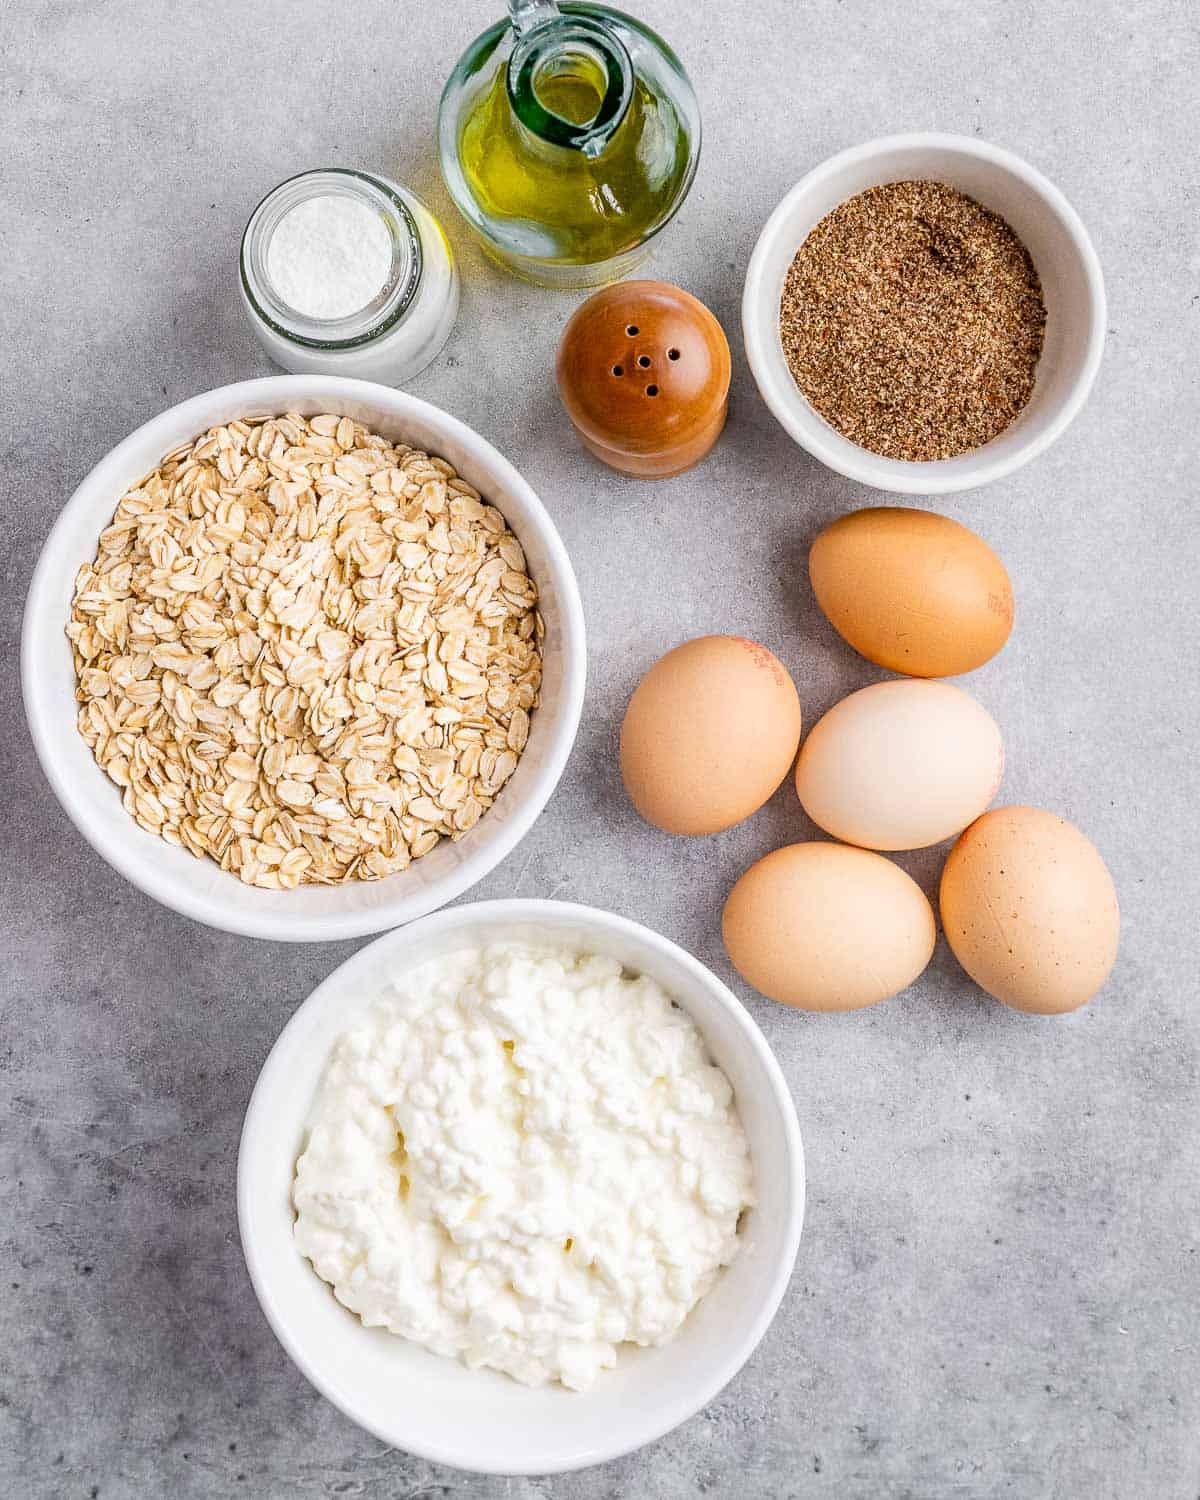 ingredients to make cottage cheese bread laid out. They are: cottage cheese in a bowl, rolled oats in a bowl, olive oil, baking powder, salt, ground flax seed in a bowl, and 6 eggs.